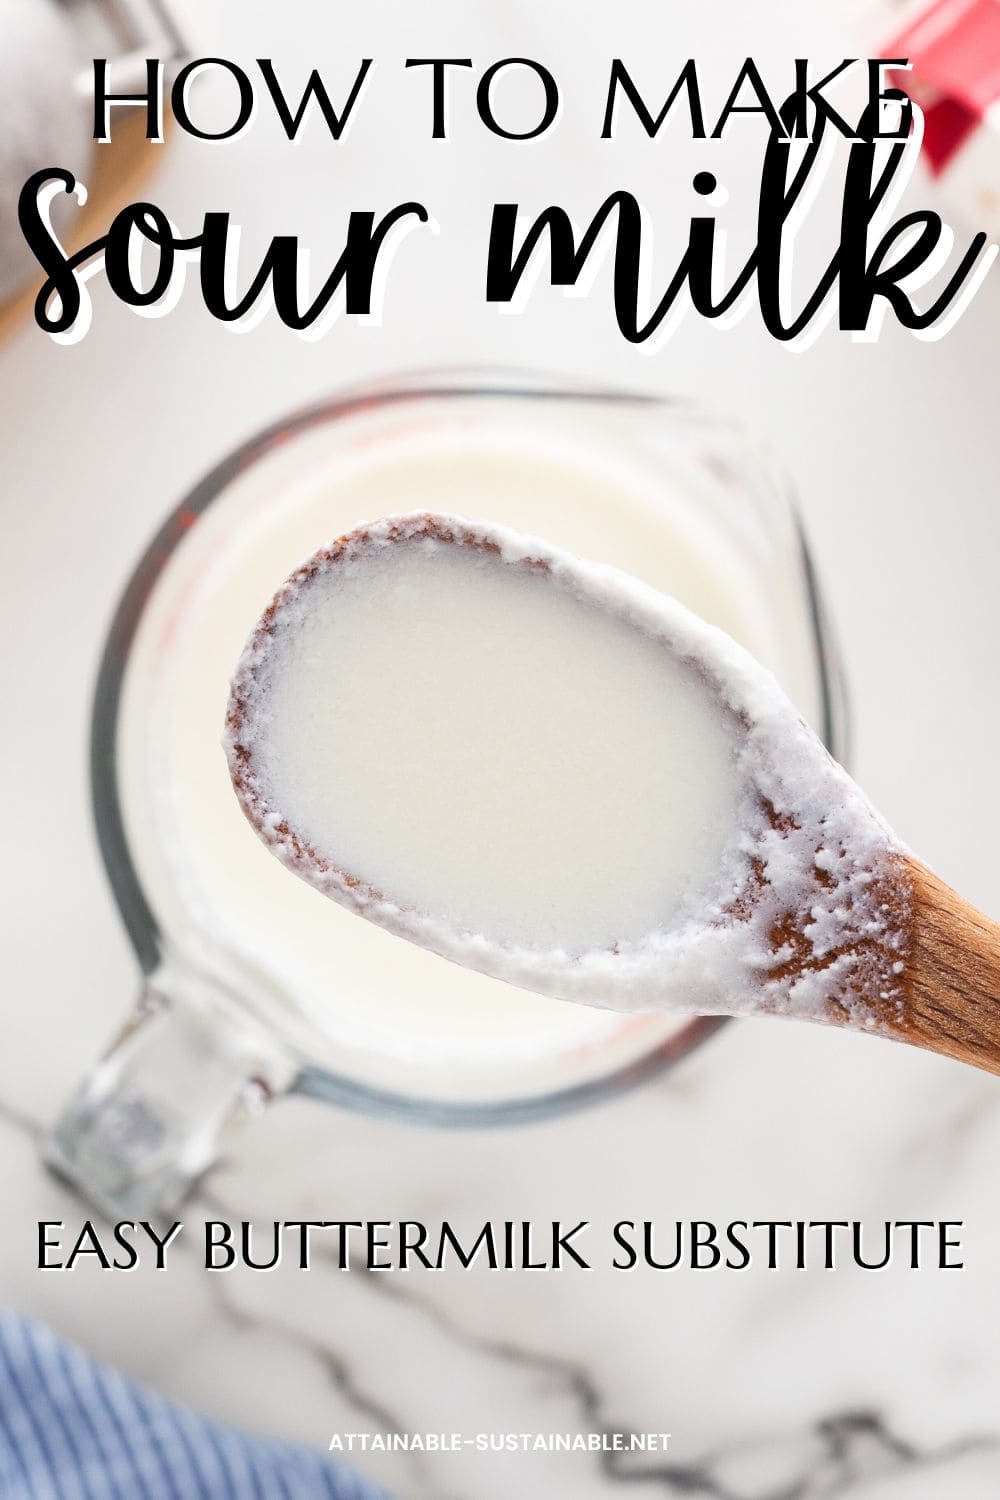 wooden spoon full of sour milk hovering above a measuring cup full of white liquid.